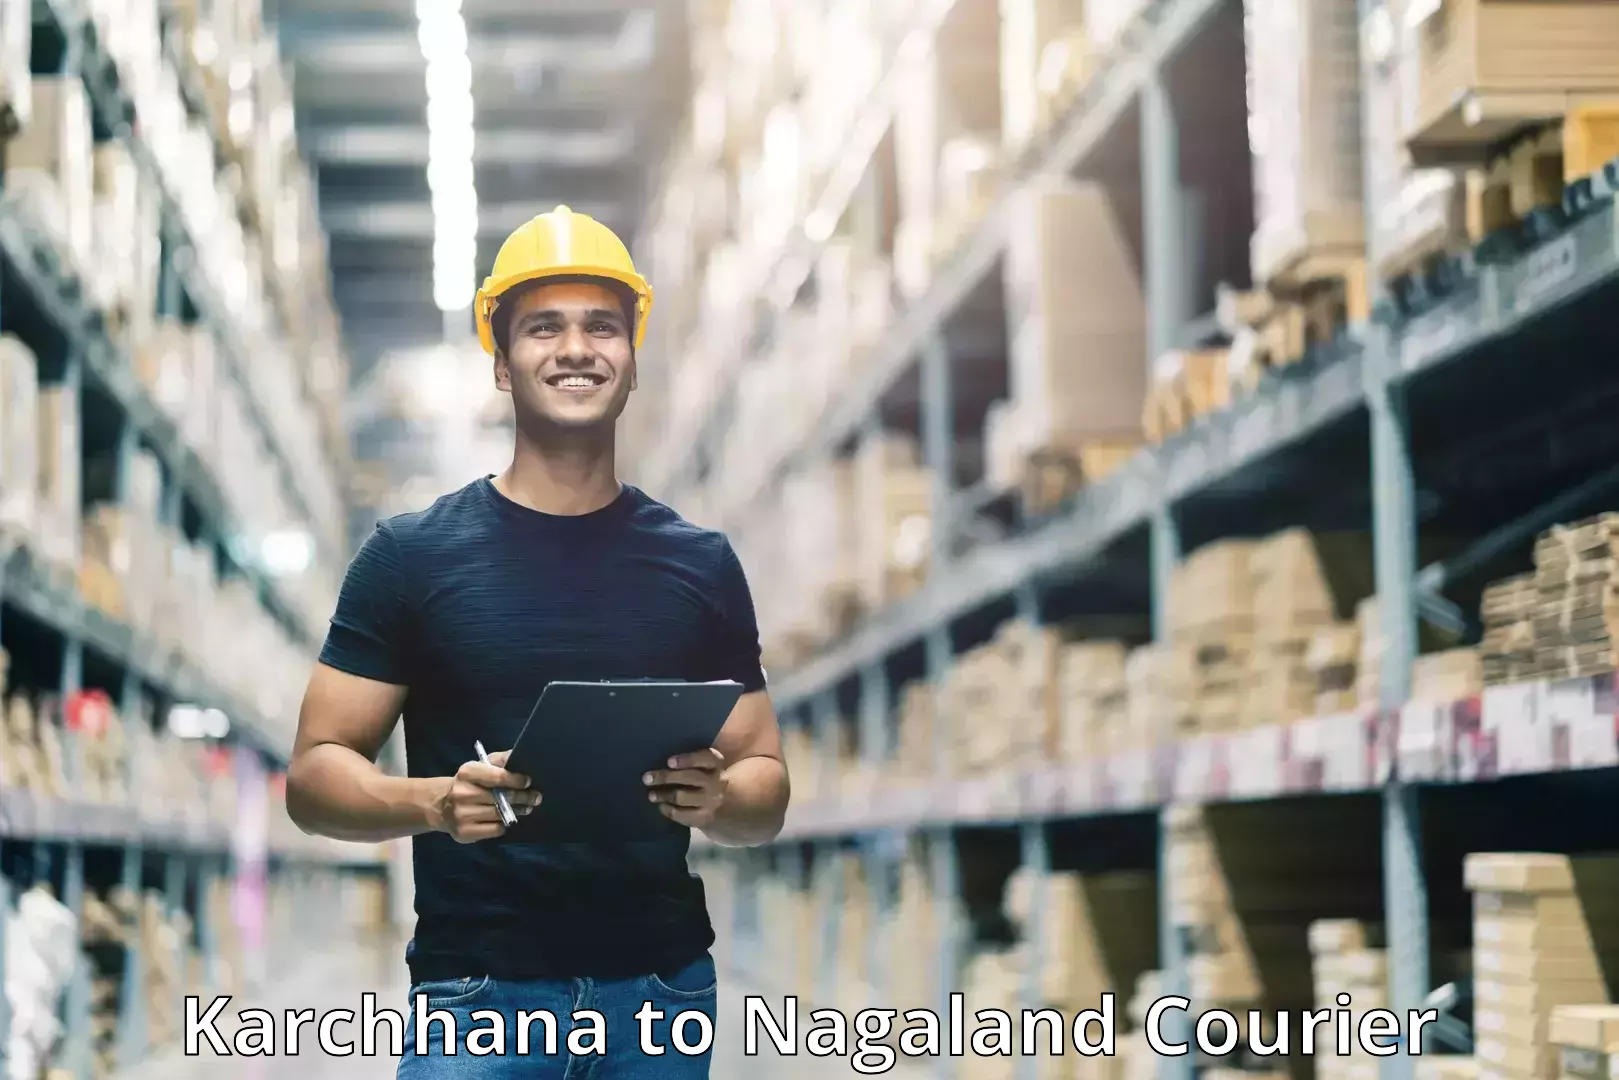 Customer-focused courier in Karchhana to Dimapur